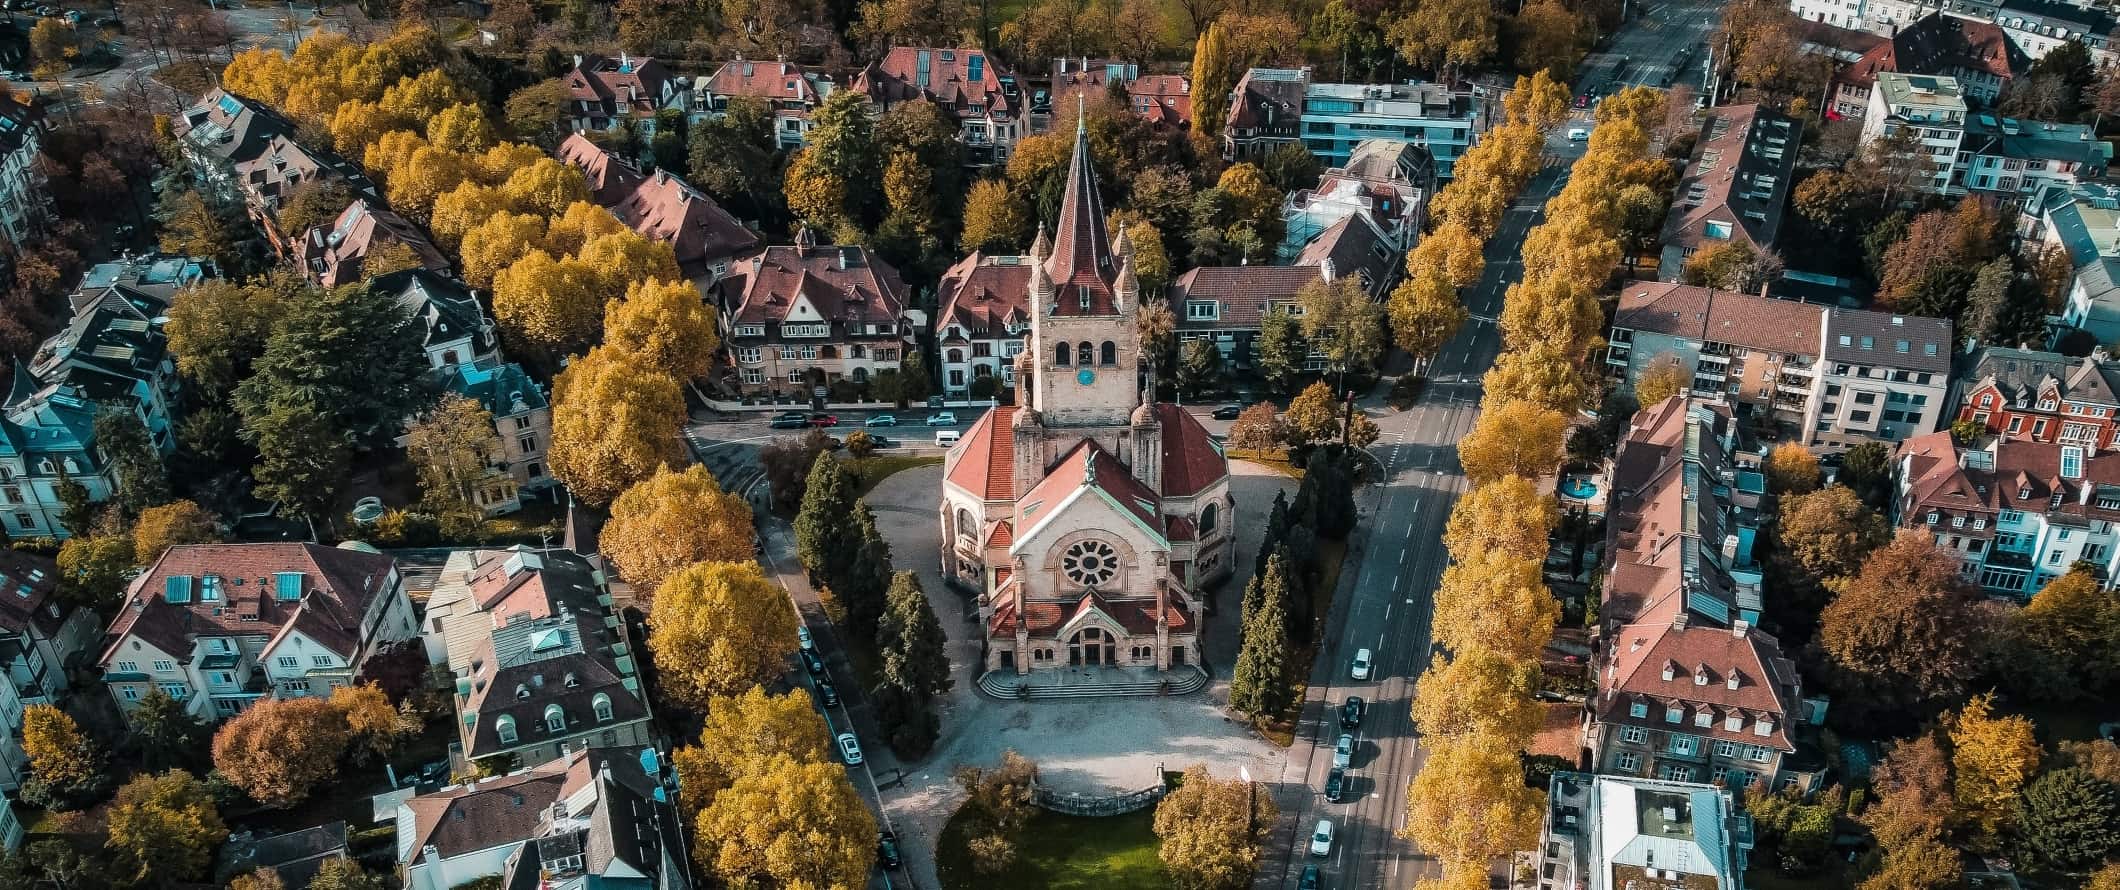 Aerial view of tree-lined streets with a historic church in a plaza in Basel, Switzerland